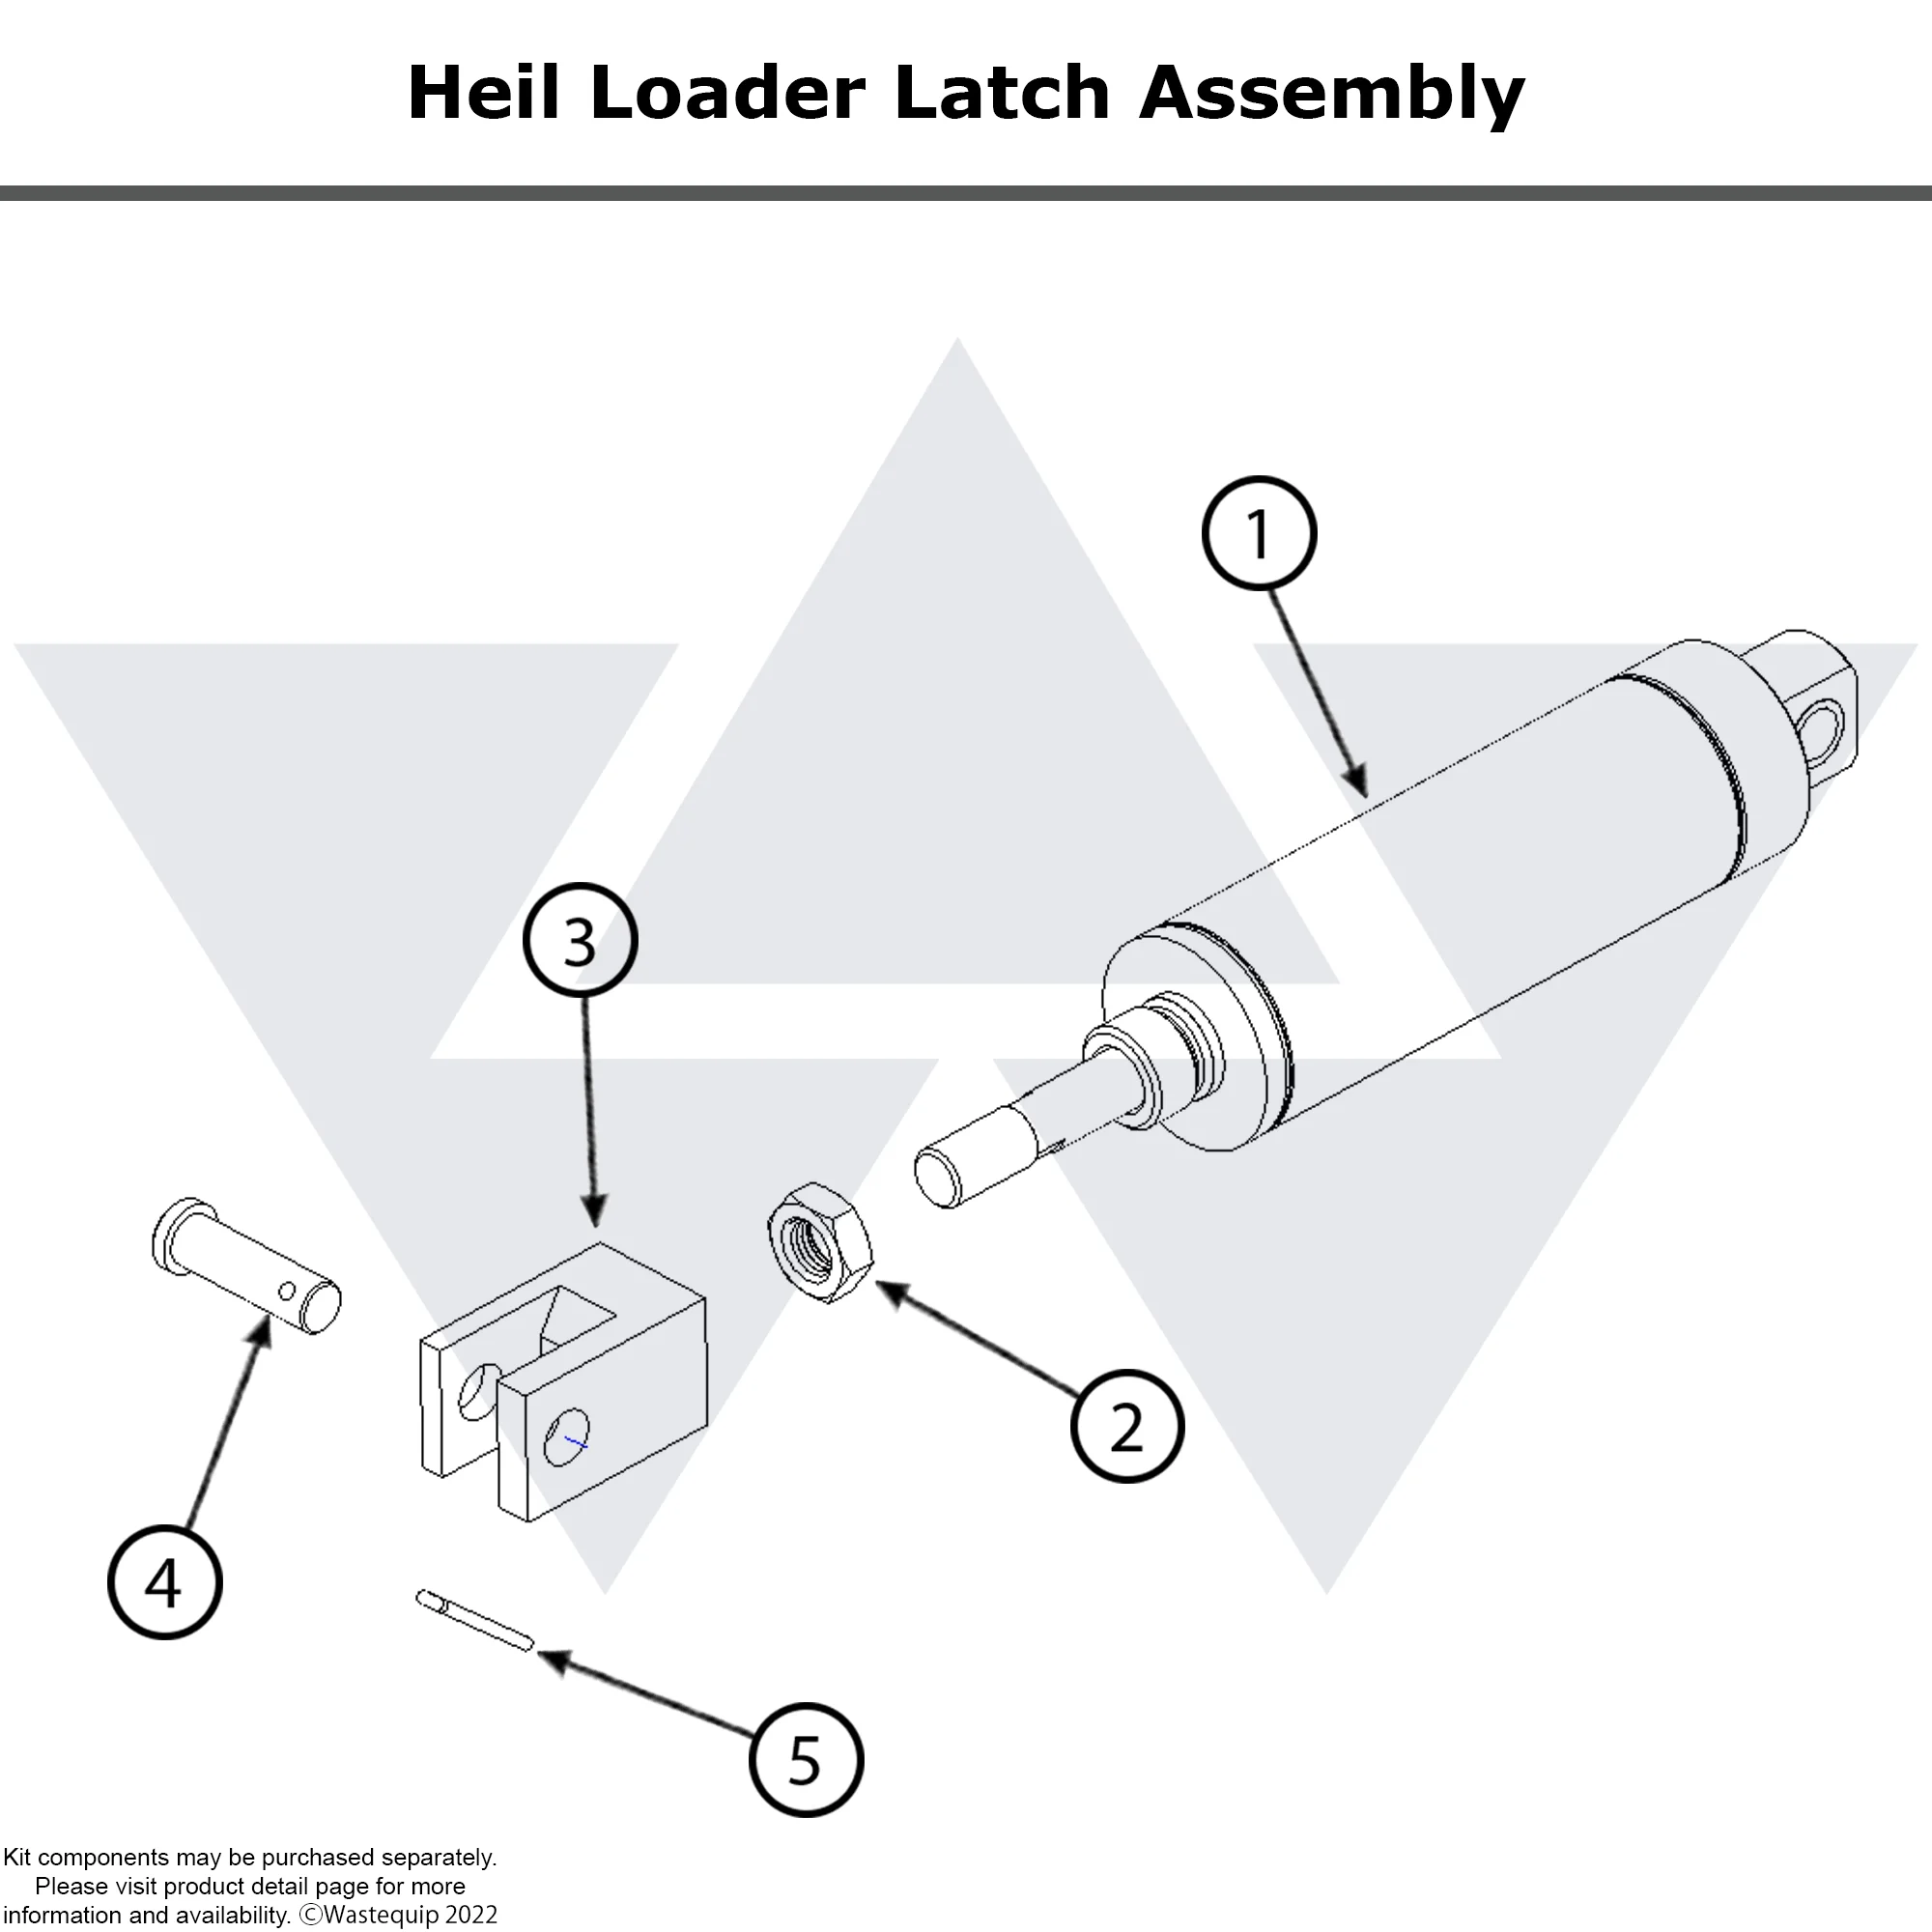 Wastebuilt® Replacement for Heil Loader Latch Assembly - Complete